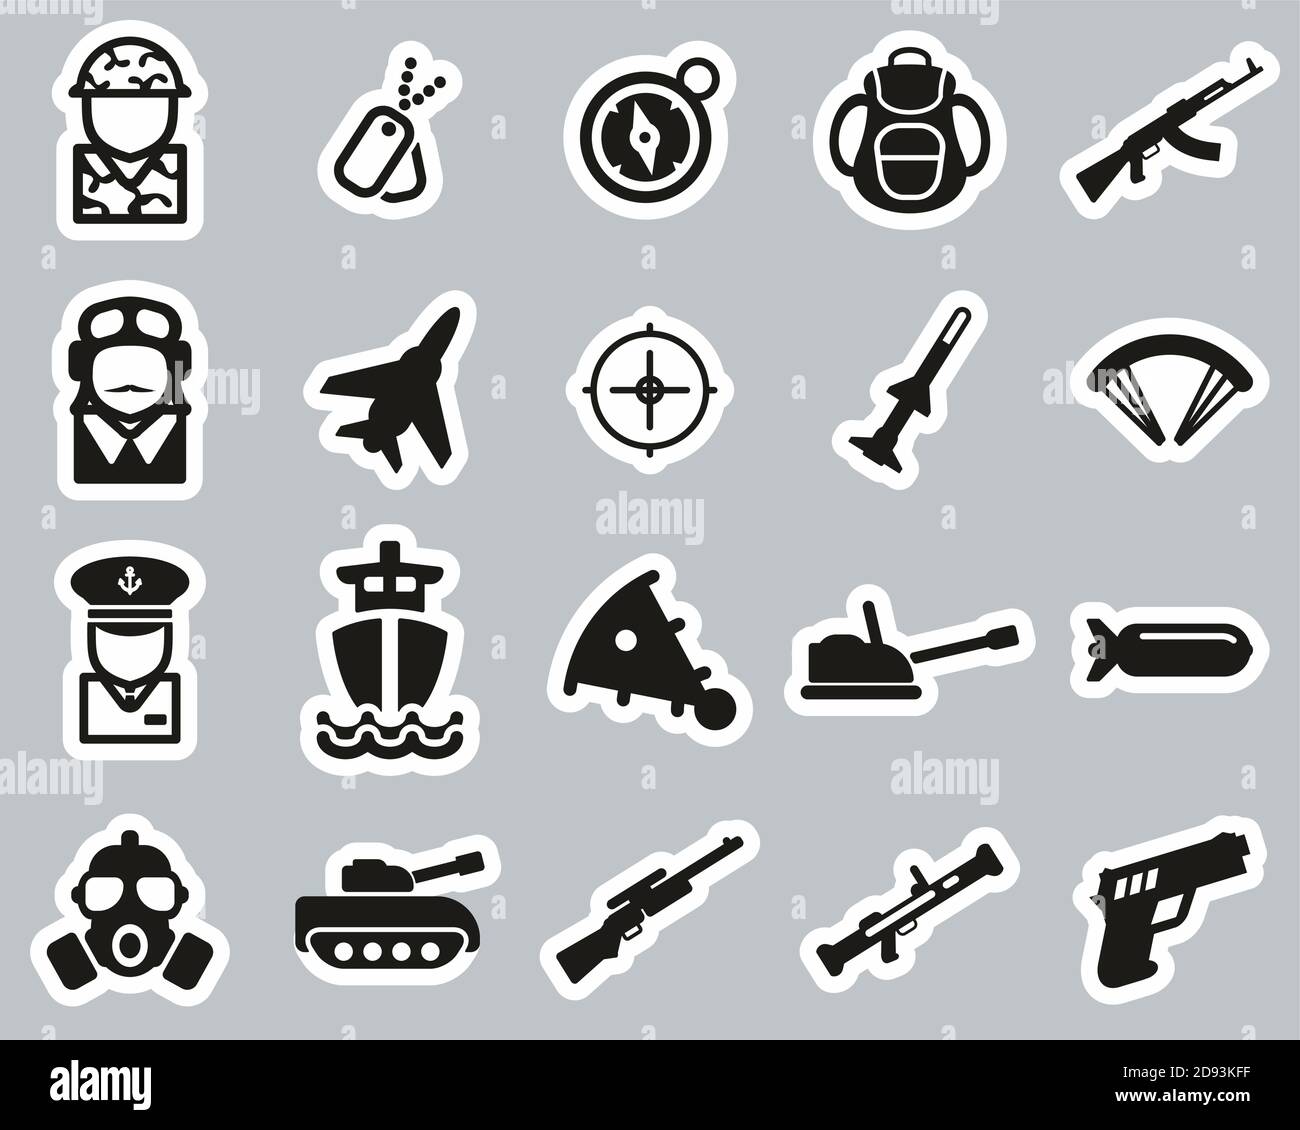 free military themed icons for windows 10